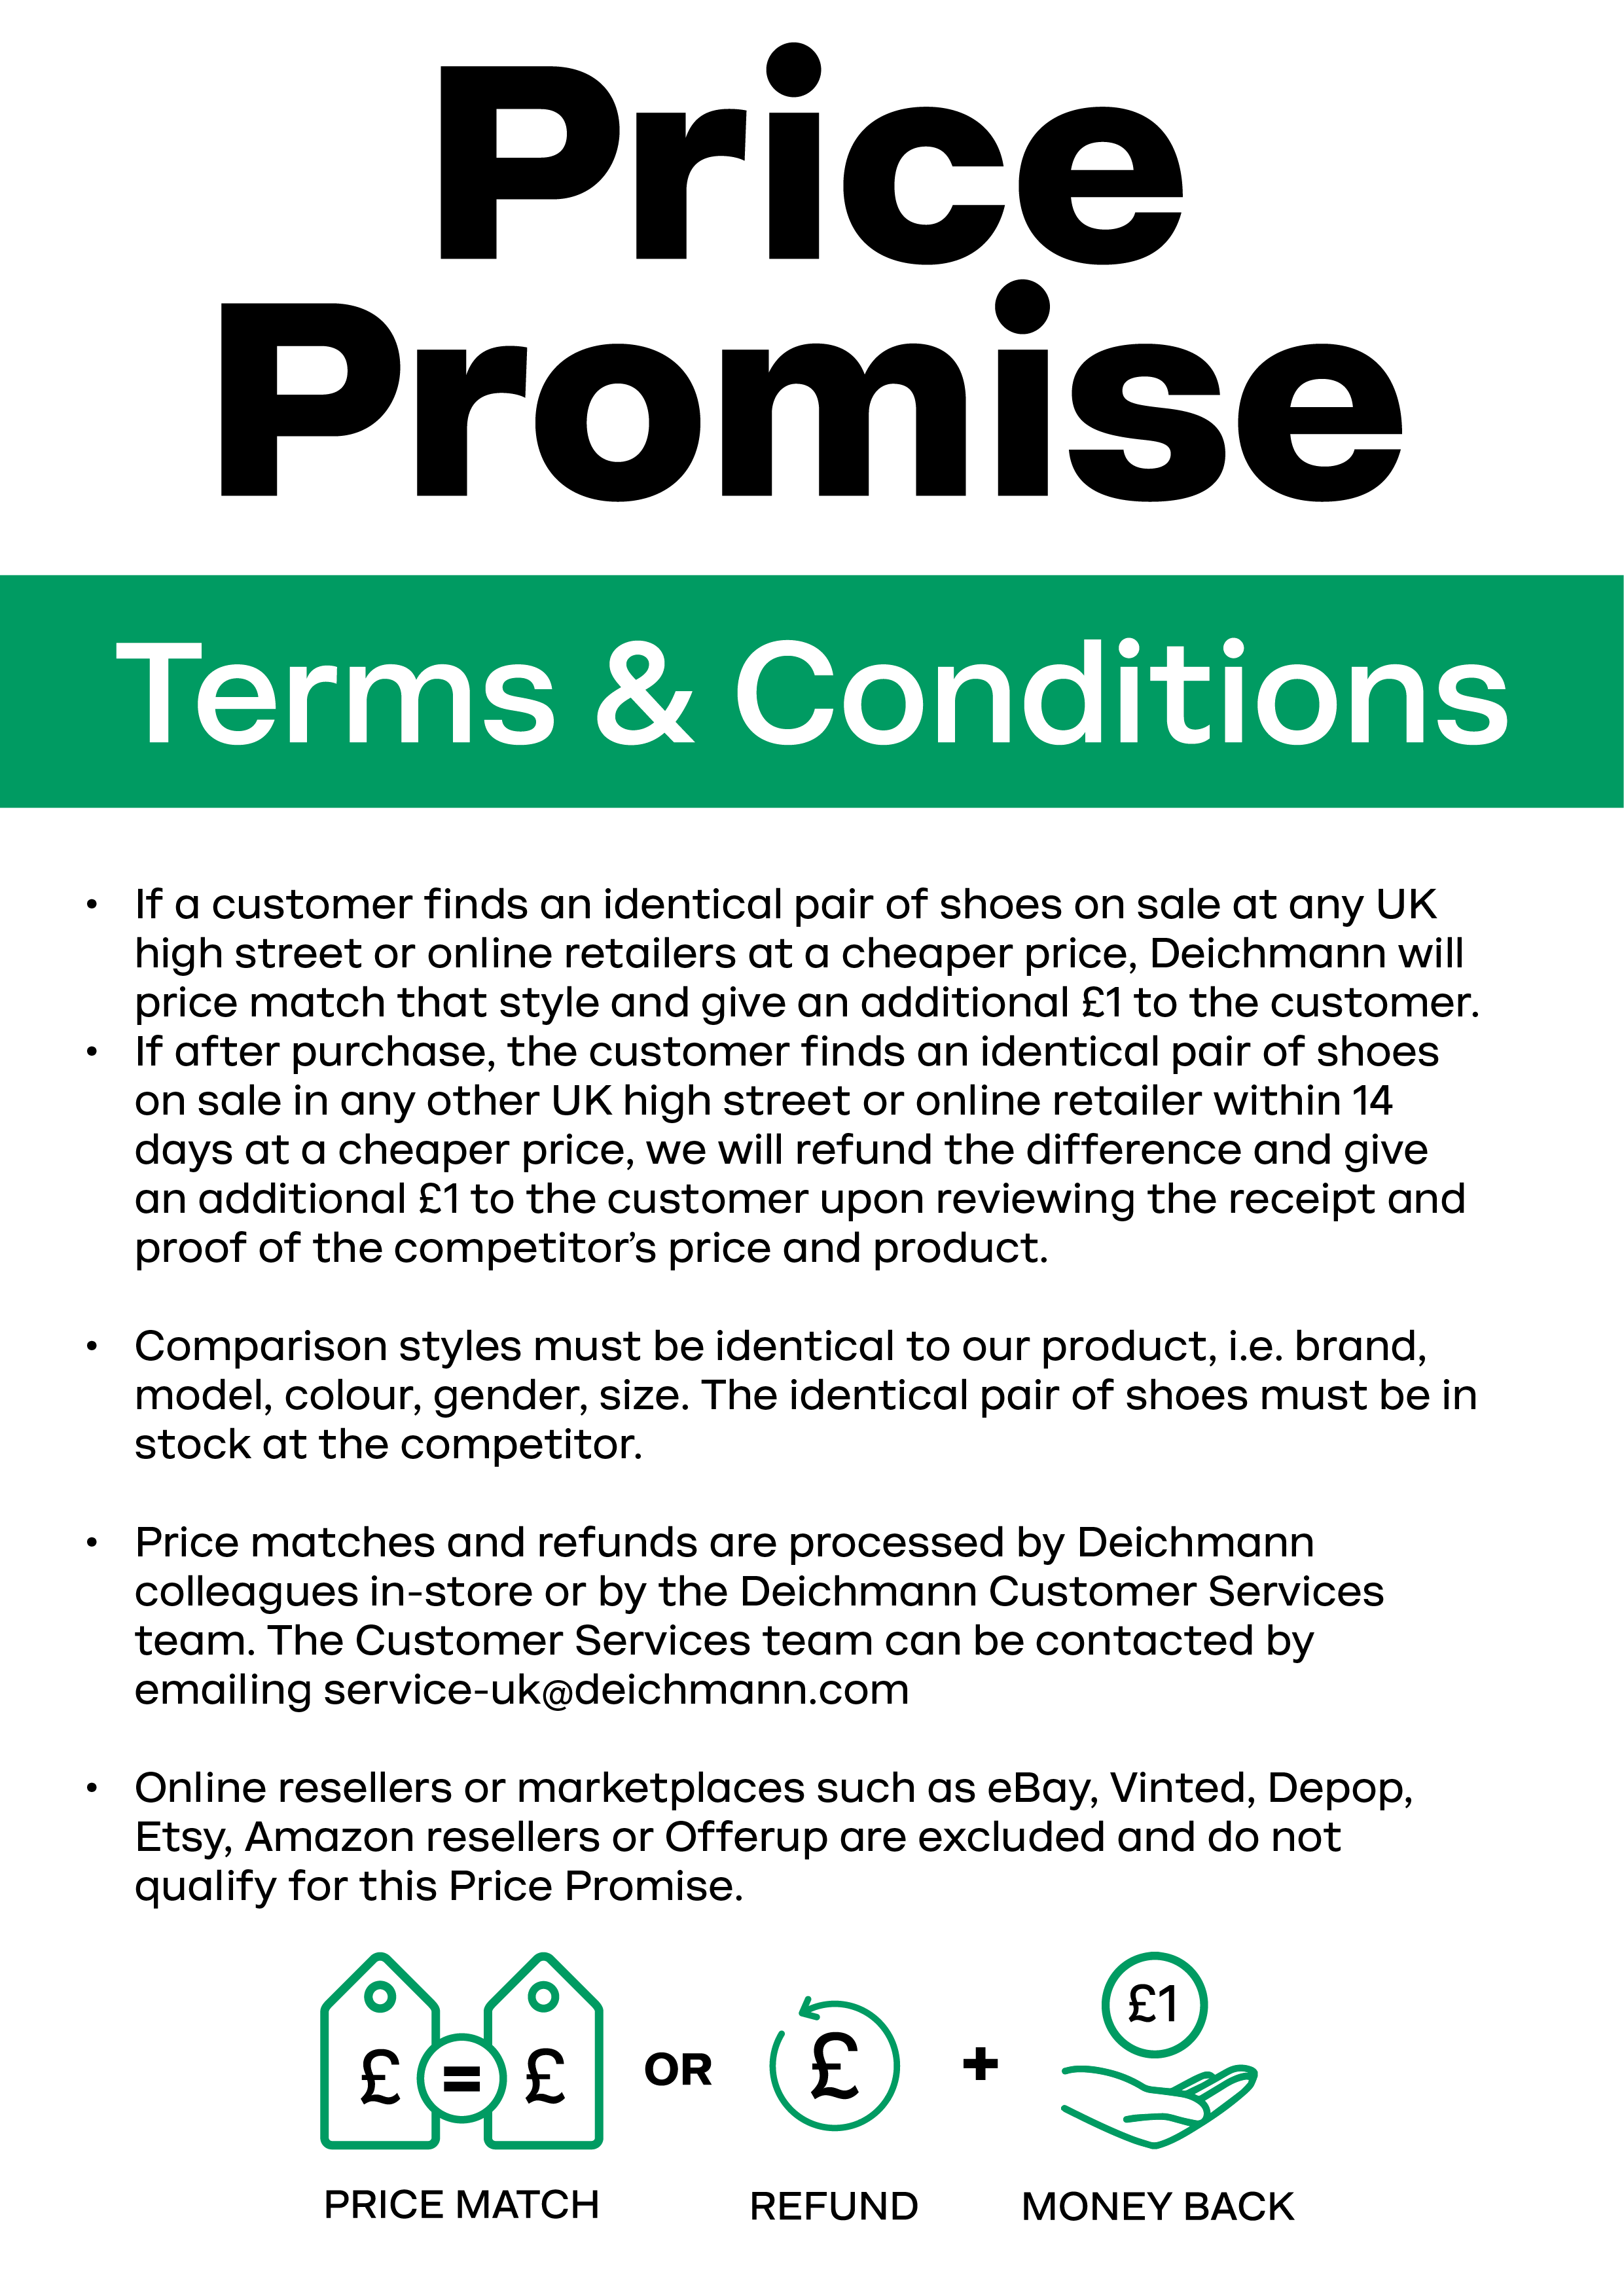 PricePromise-Poster.png